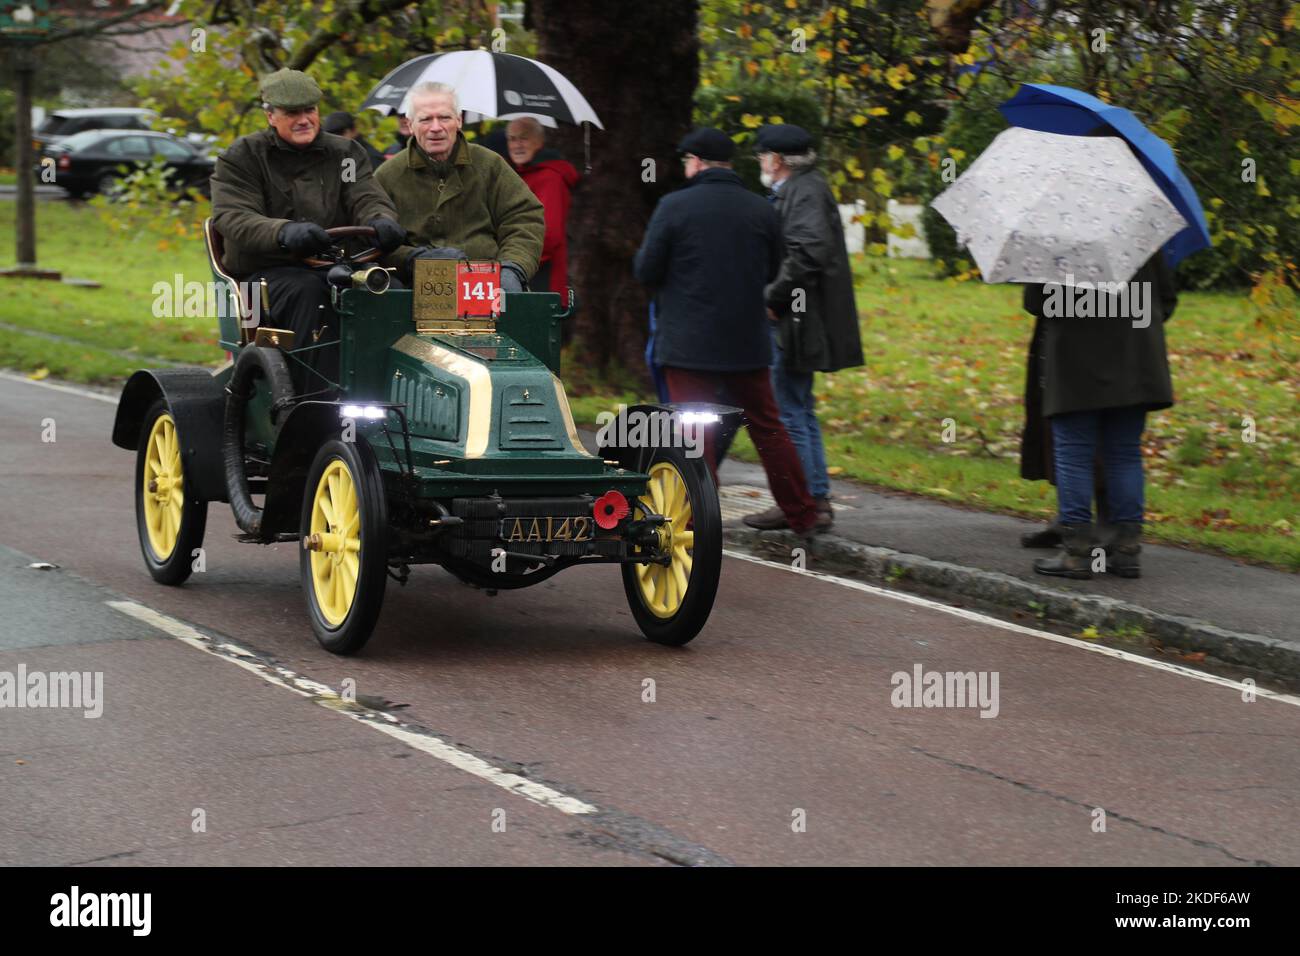 Staplefield, UK. 06th Nov, 2021. Participants battle the weather in their vintage vehicles during the historic London to Brighton Veteran Car Run. The run set off from Hyde Park in London at sunrise and makes its journey to Brighton on the Sussex coast. Credit: Uwe Deffner/Alamy Live News Stock Photo